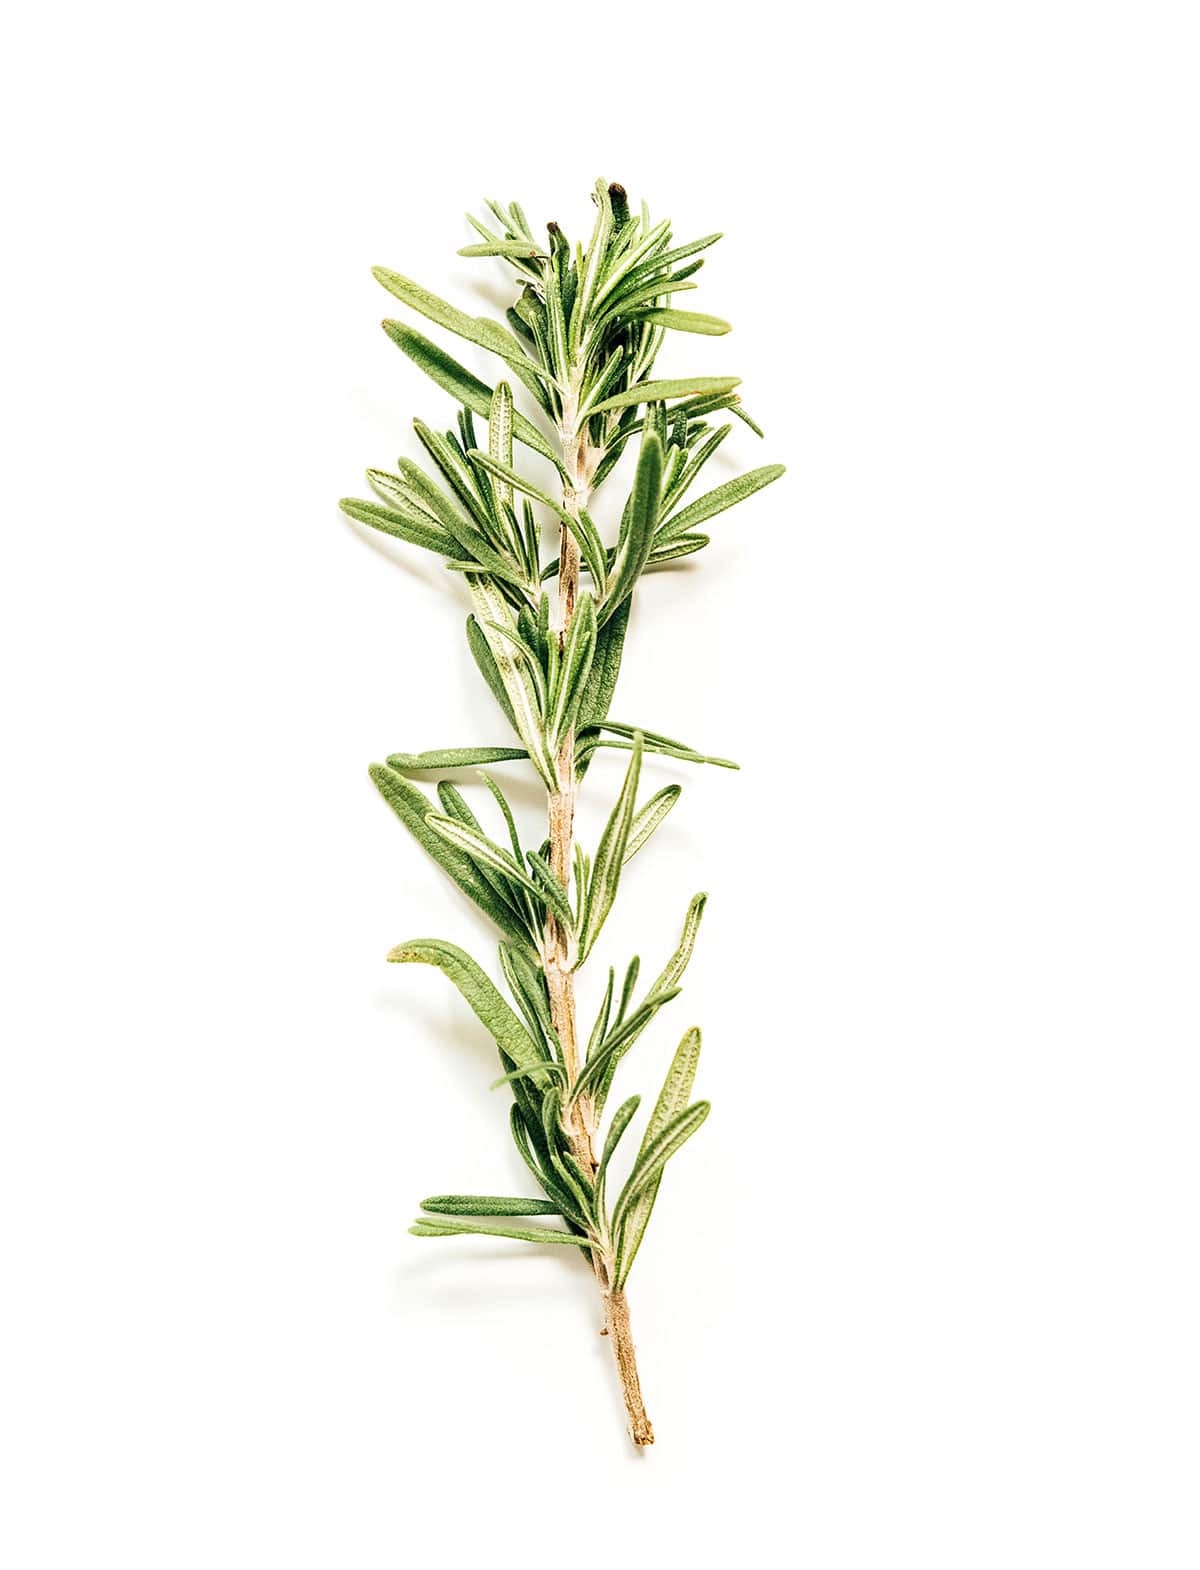 A sprig of rosemary on a white background